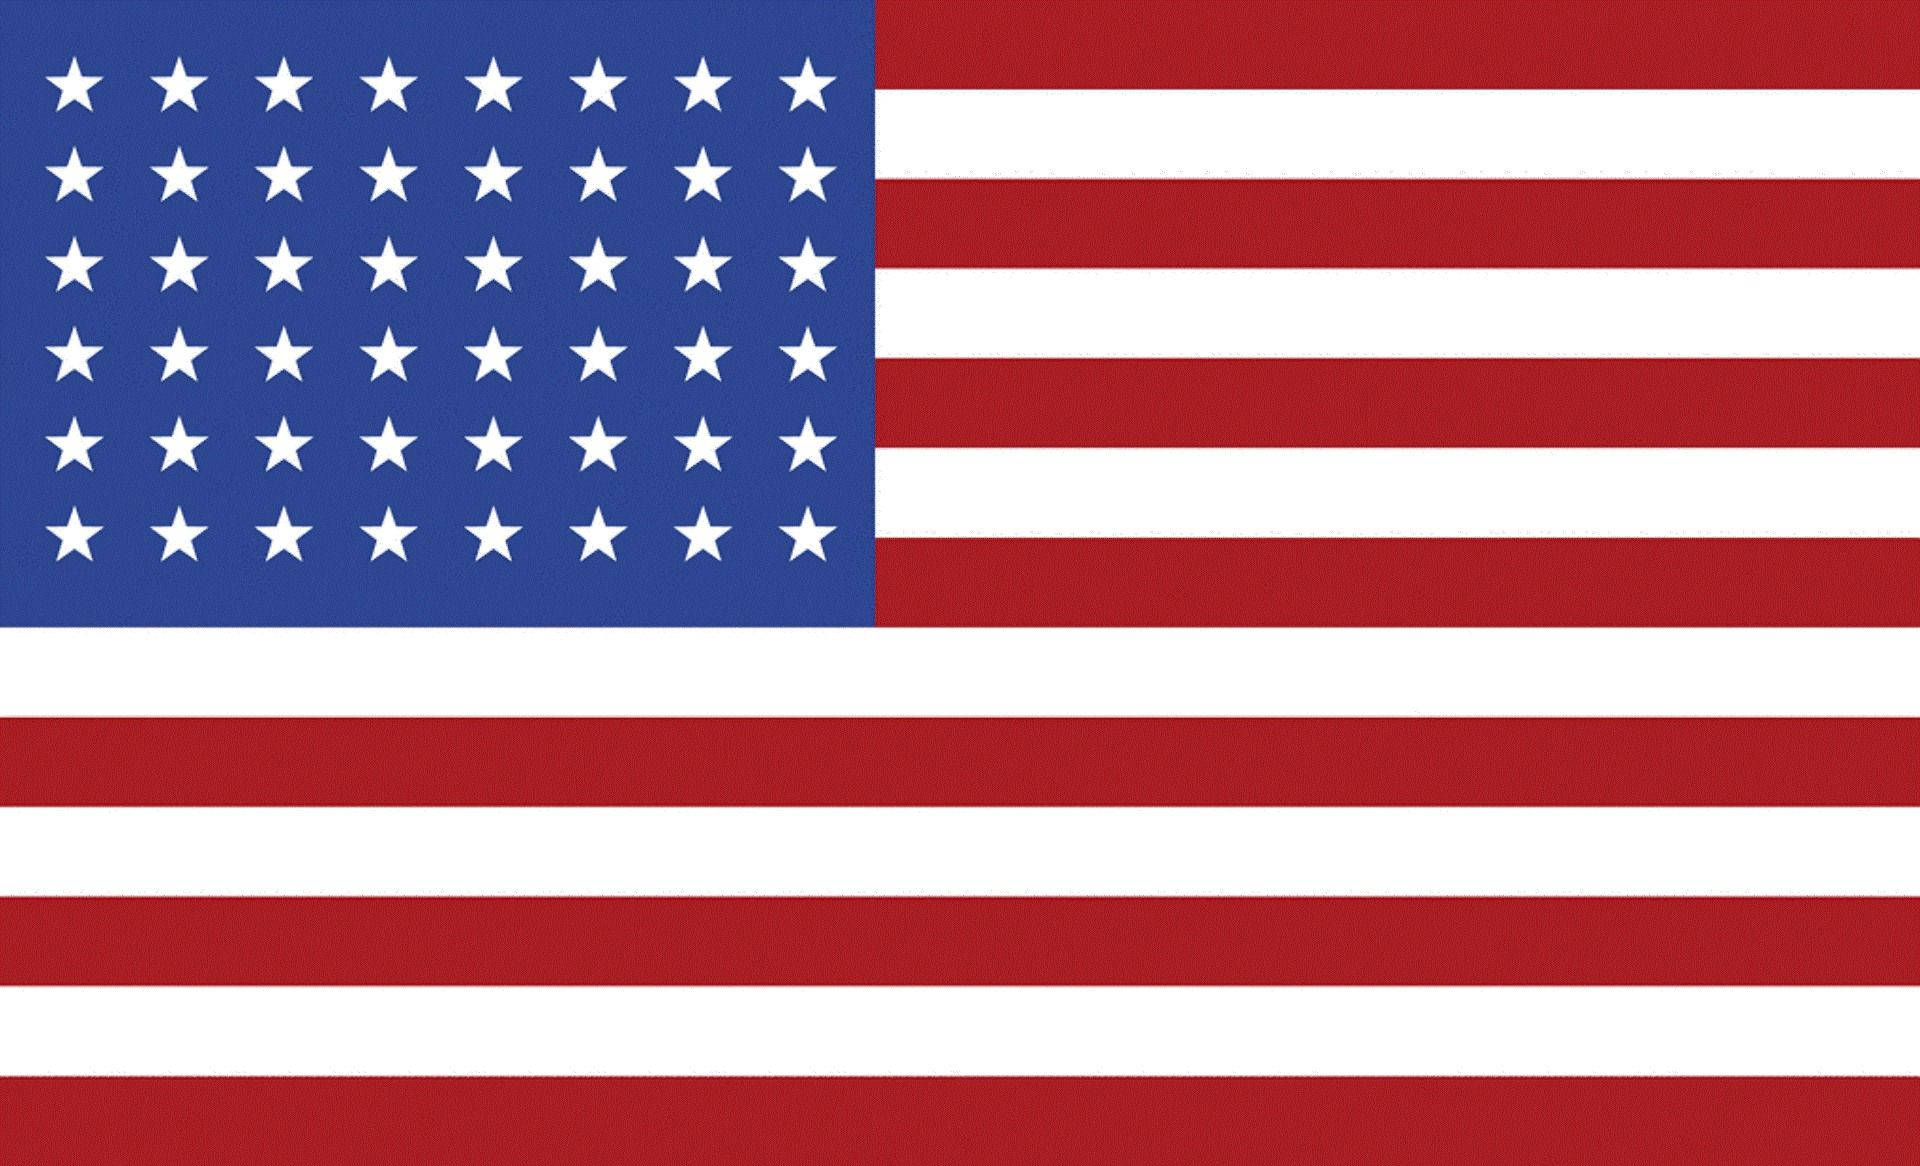 Celebrate the Country with this Wallpaper of a Digital American Flag Wallpaper